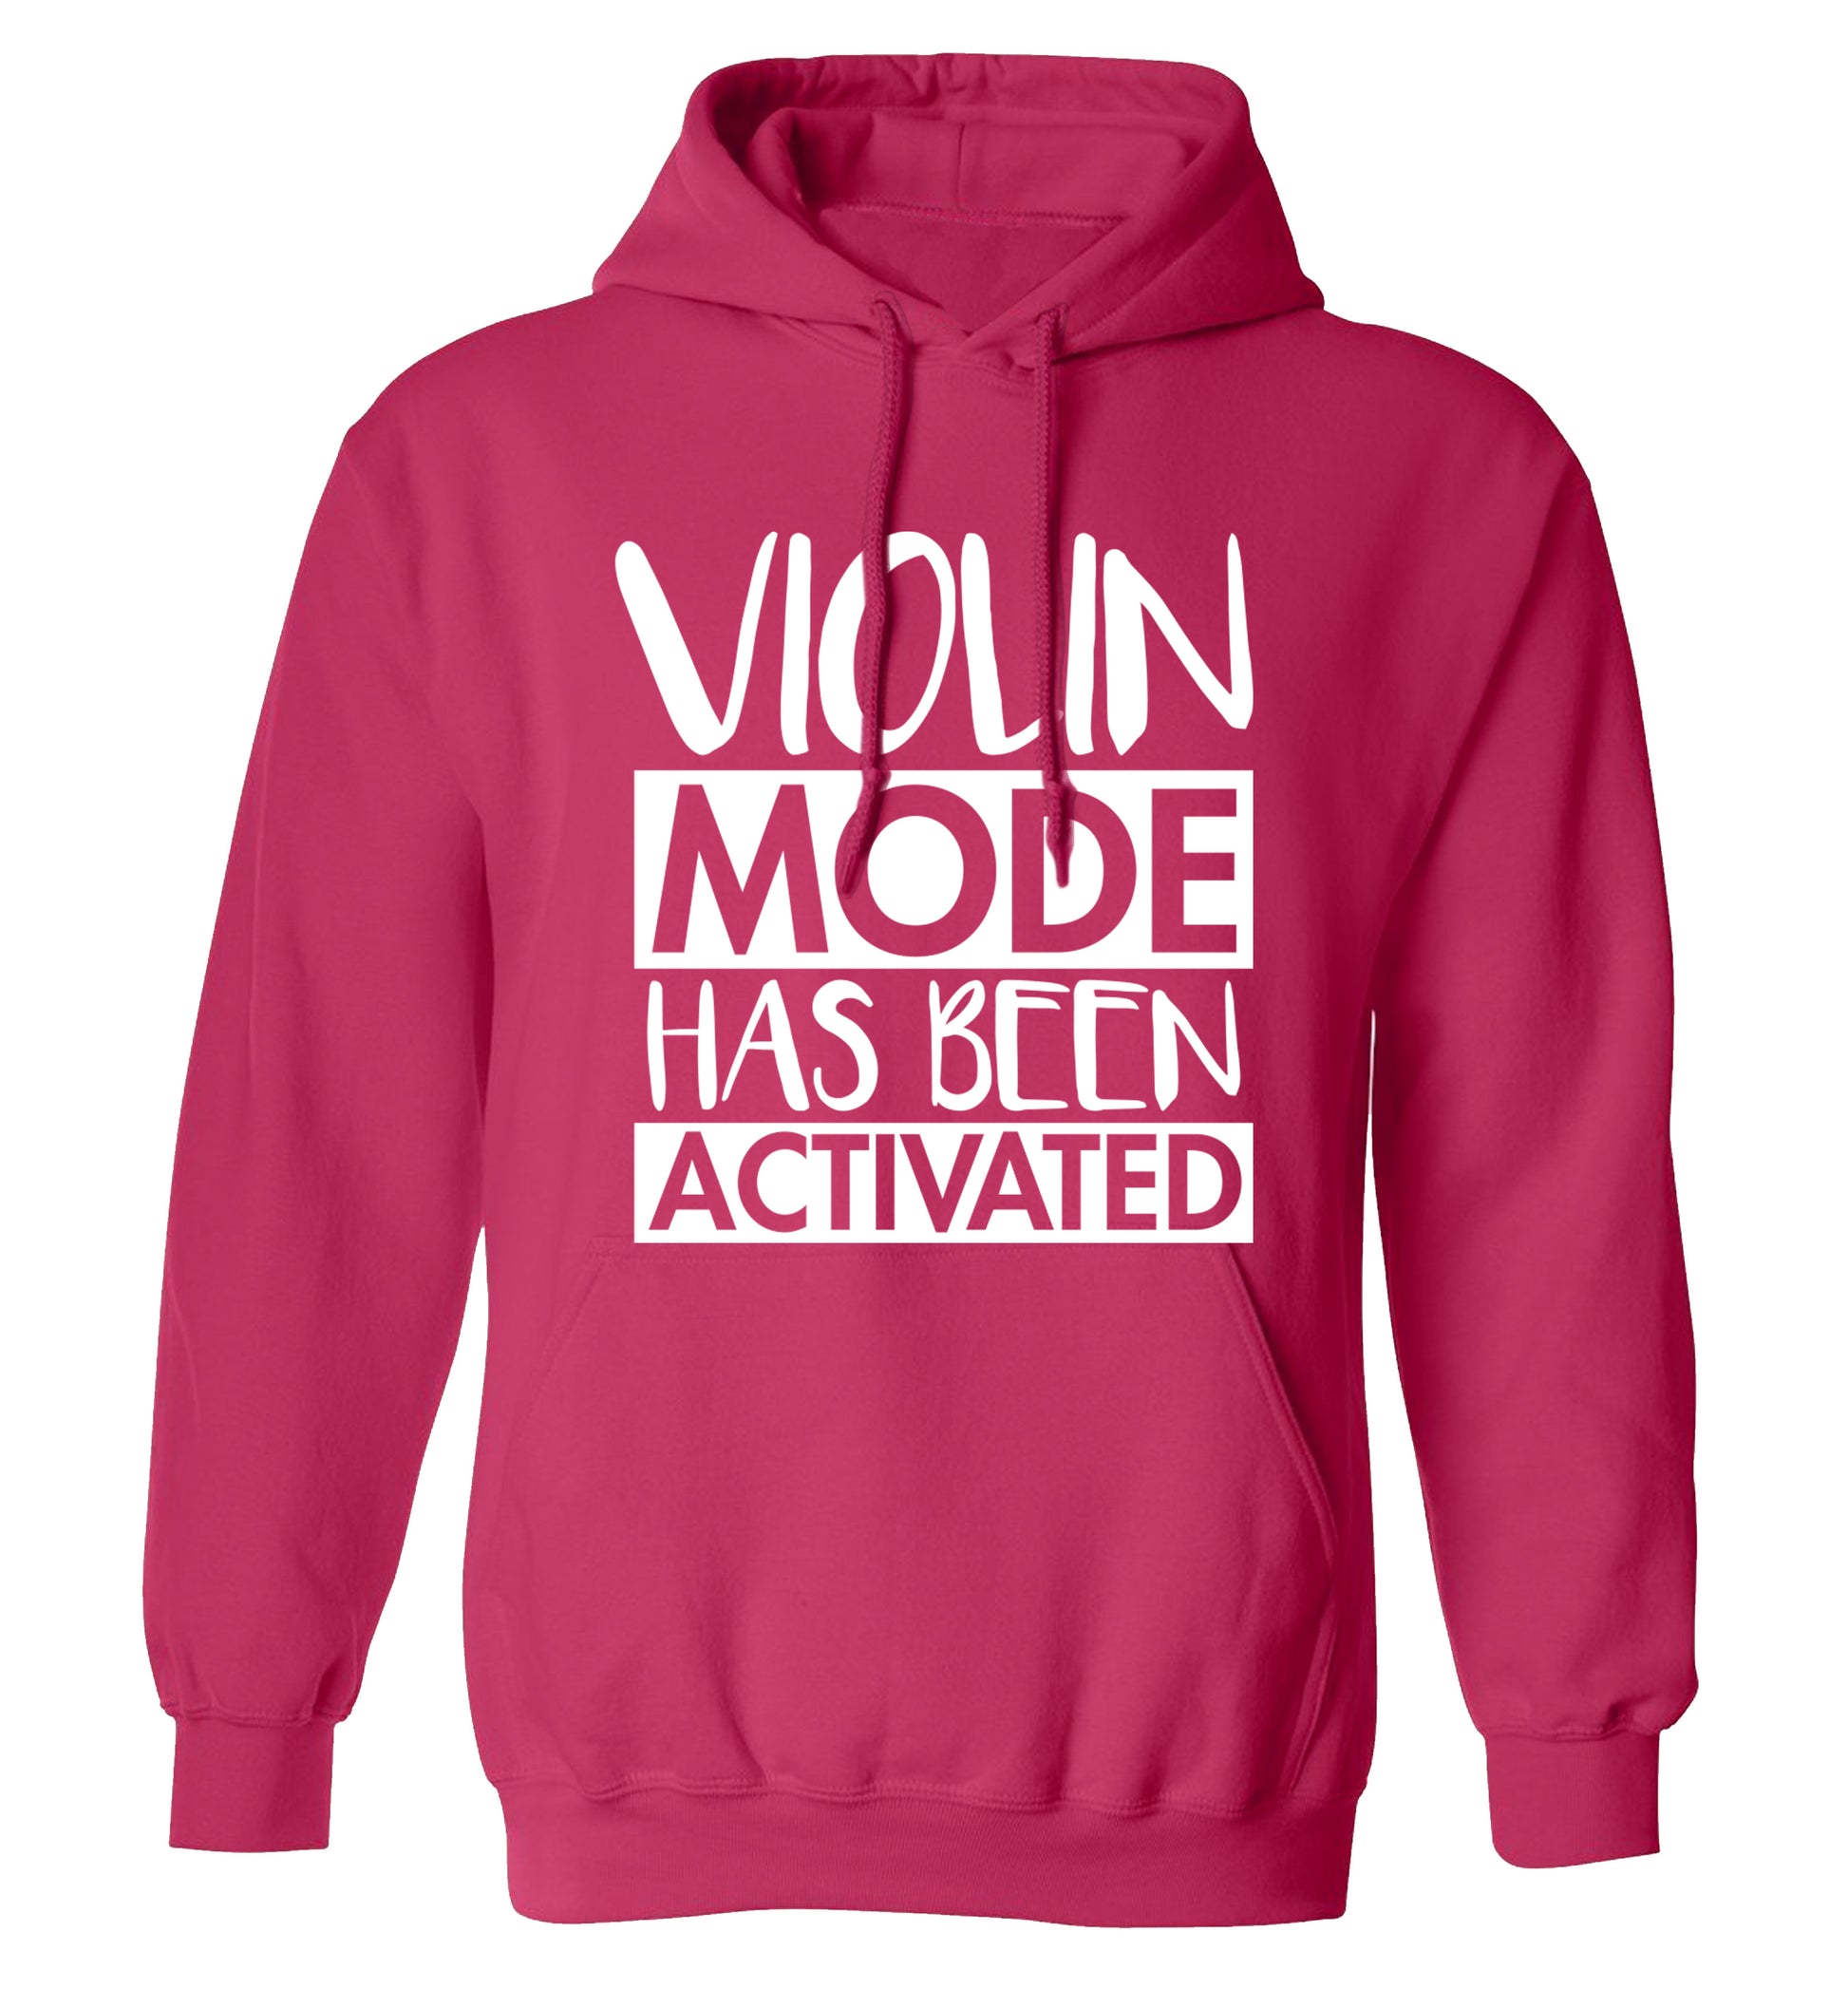 Violin Mode Activated adults unisex pink hoodie 2XL